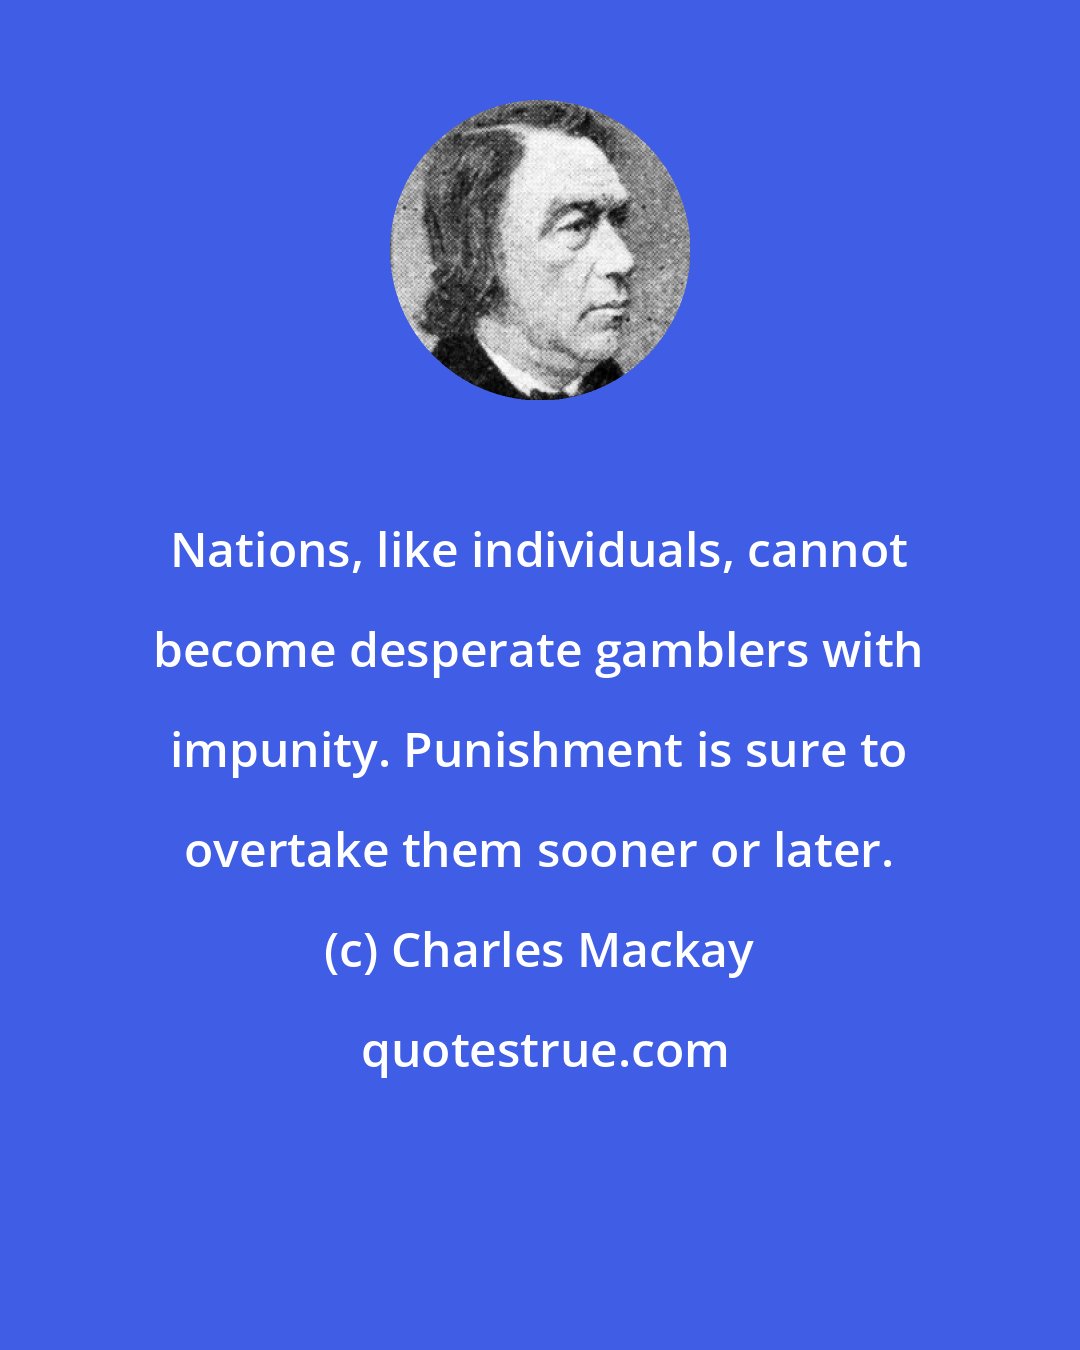 Charles Mackay: Nations, like individuals, cannot become desperate gamblers with impunity. Punishment is sure to overtake them sooner or later.